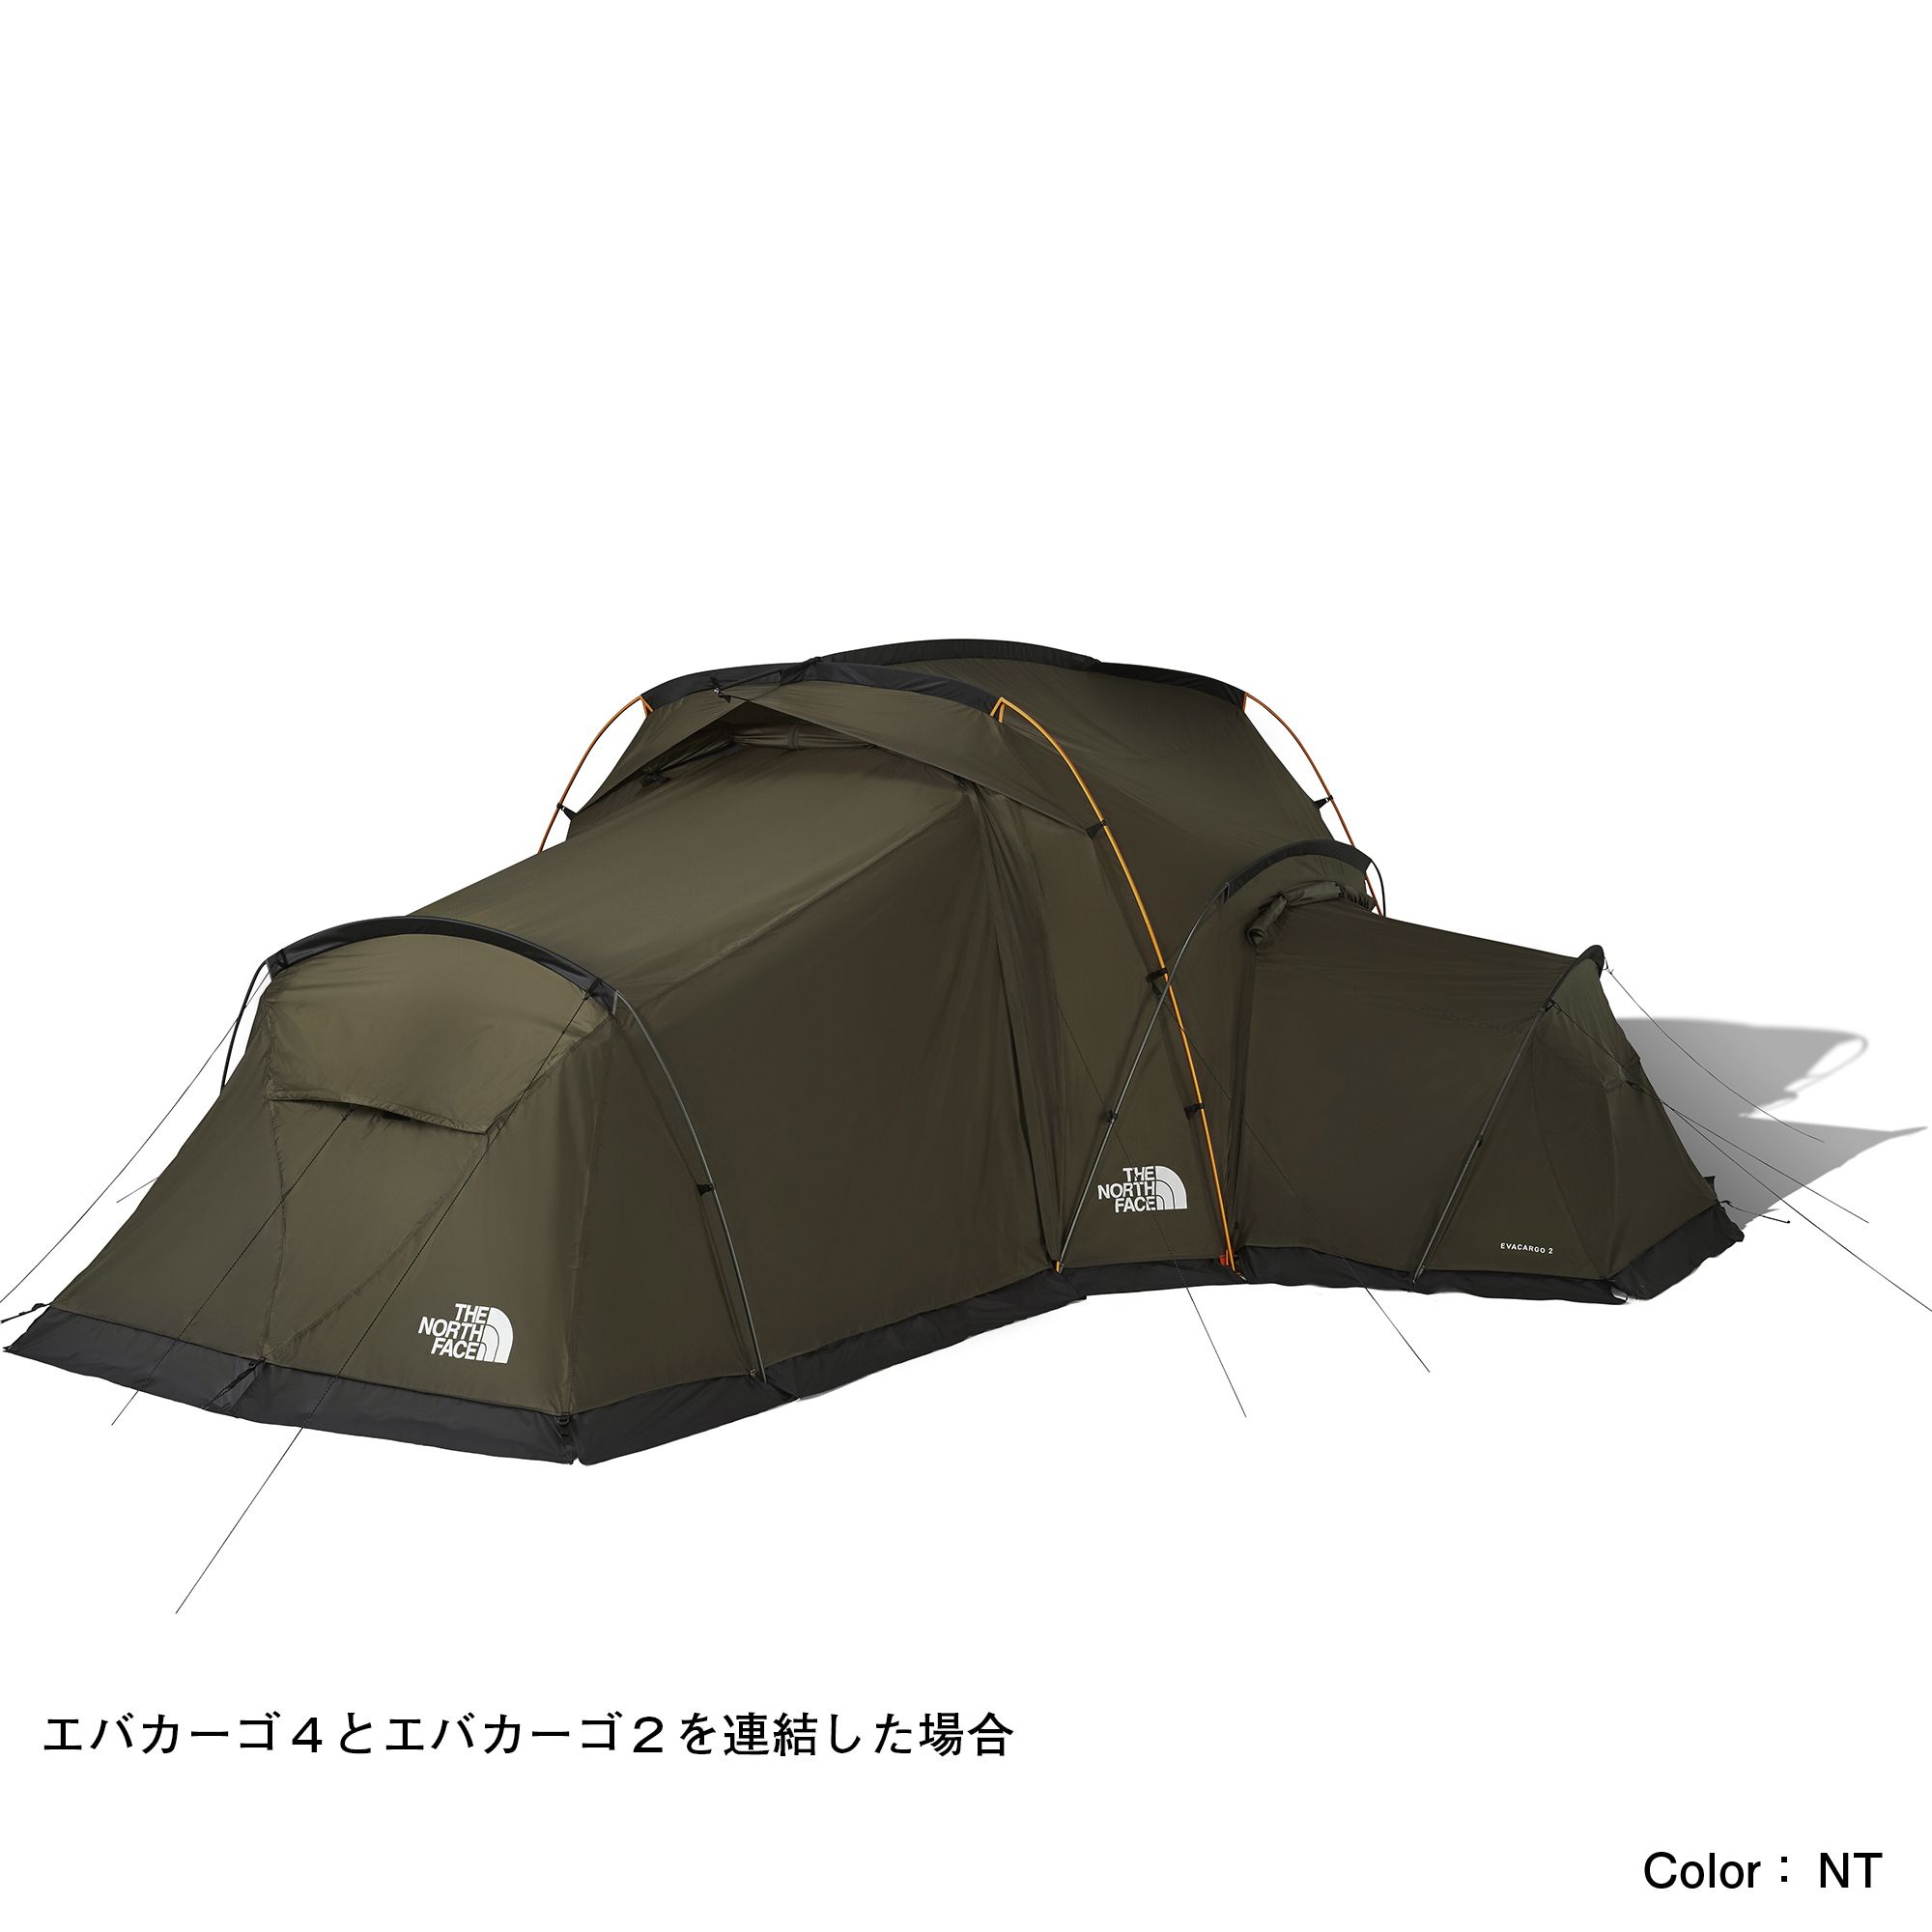 THE NORTH FACE - 新品ノースフェイス エバベース6 evabase6 THE NORTH FACE 【コンビニ受取対応商品】